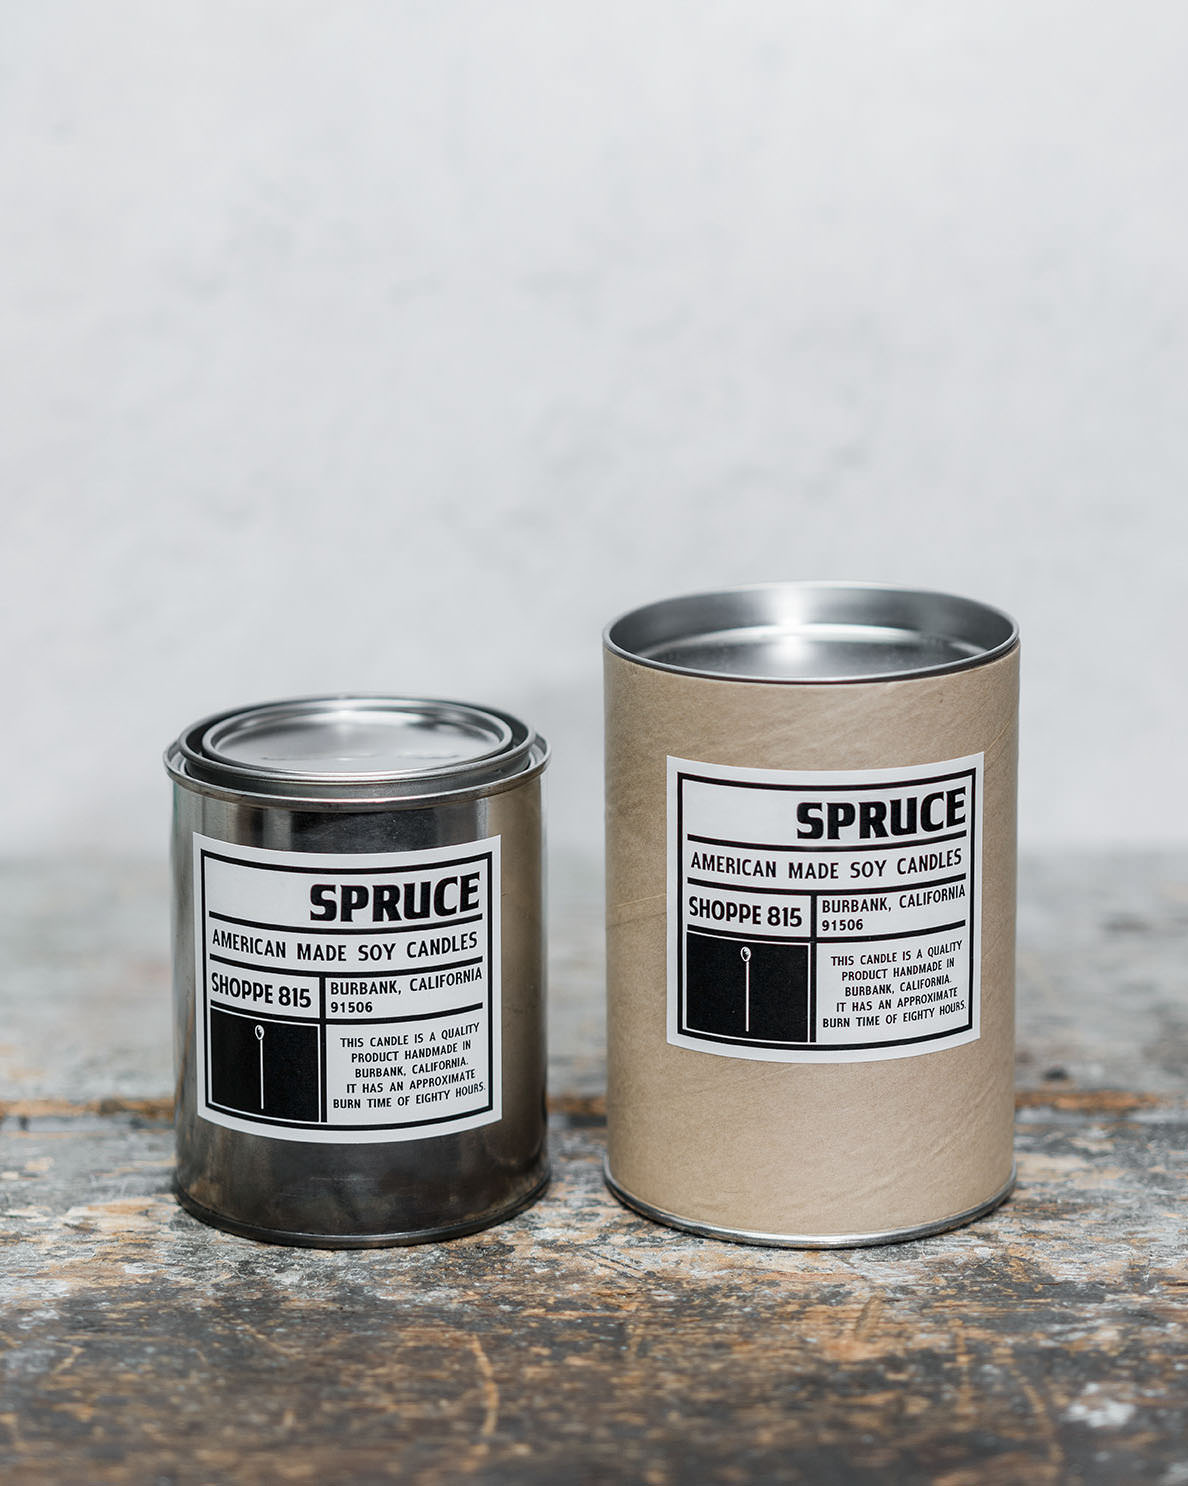 Spruce gender neutral tin candle on wooden shelf with packaging